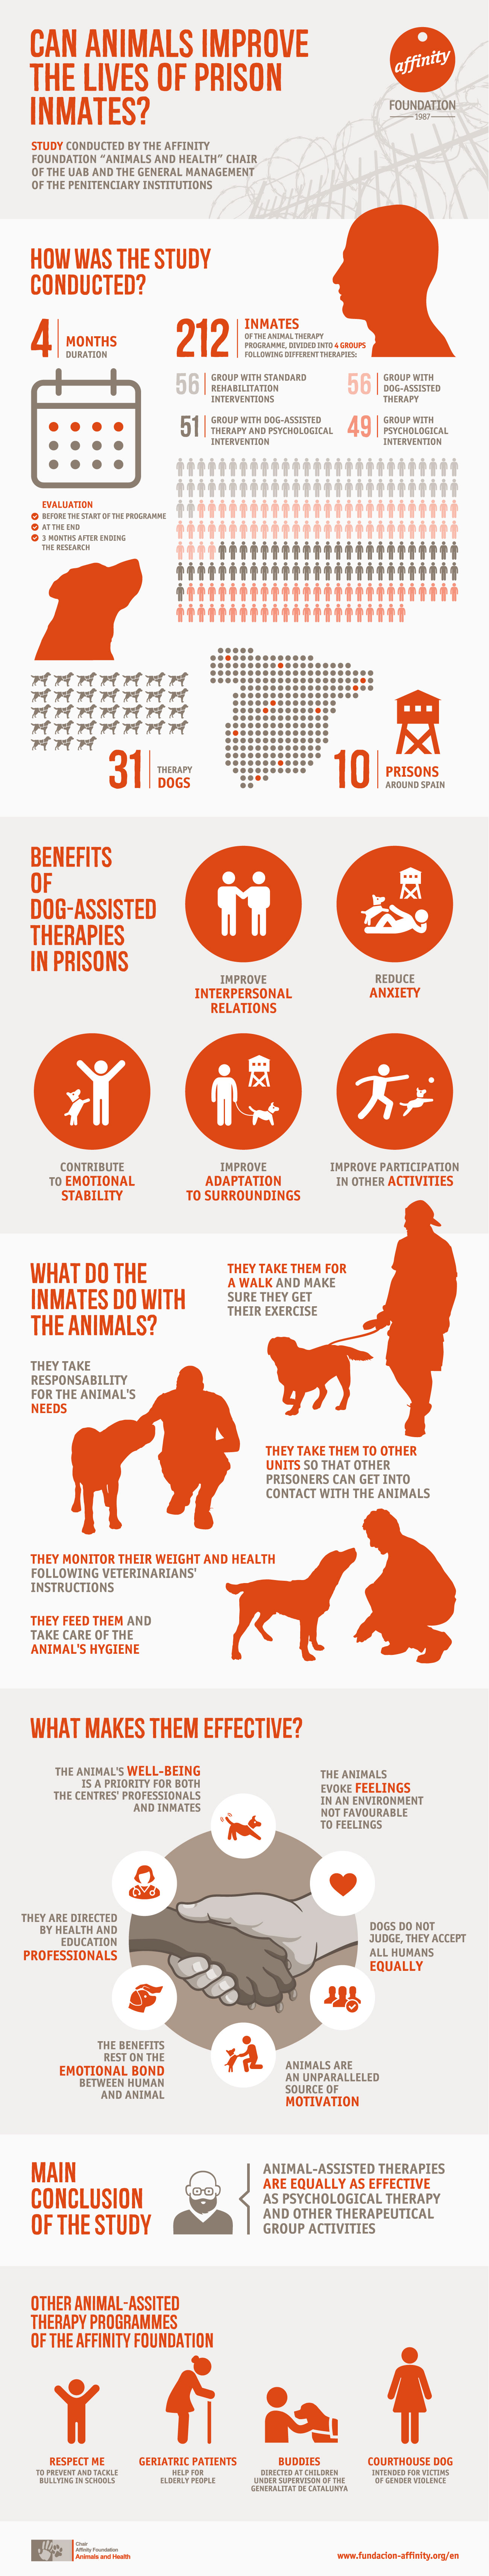 Study of dog-assisted therapy in prisons Graphic